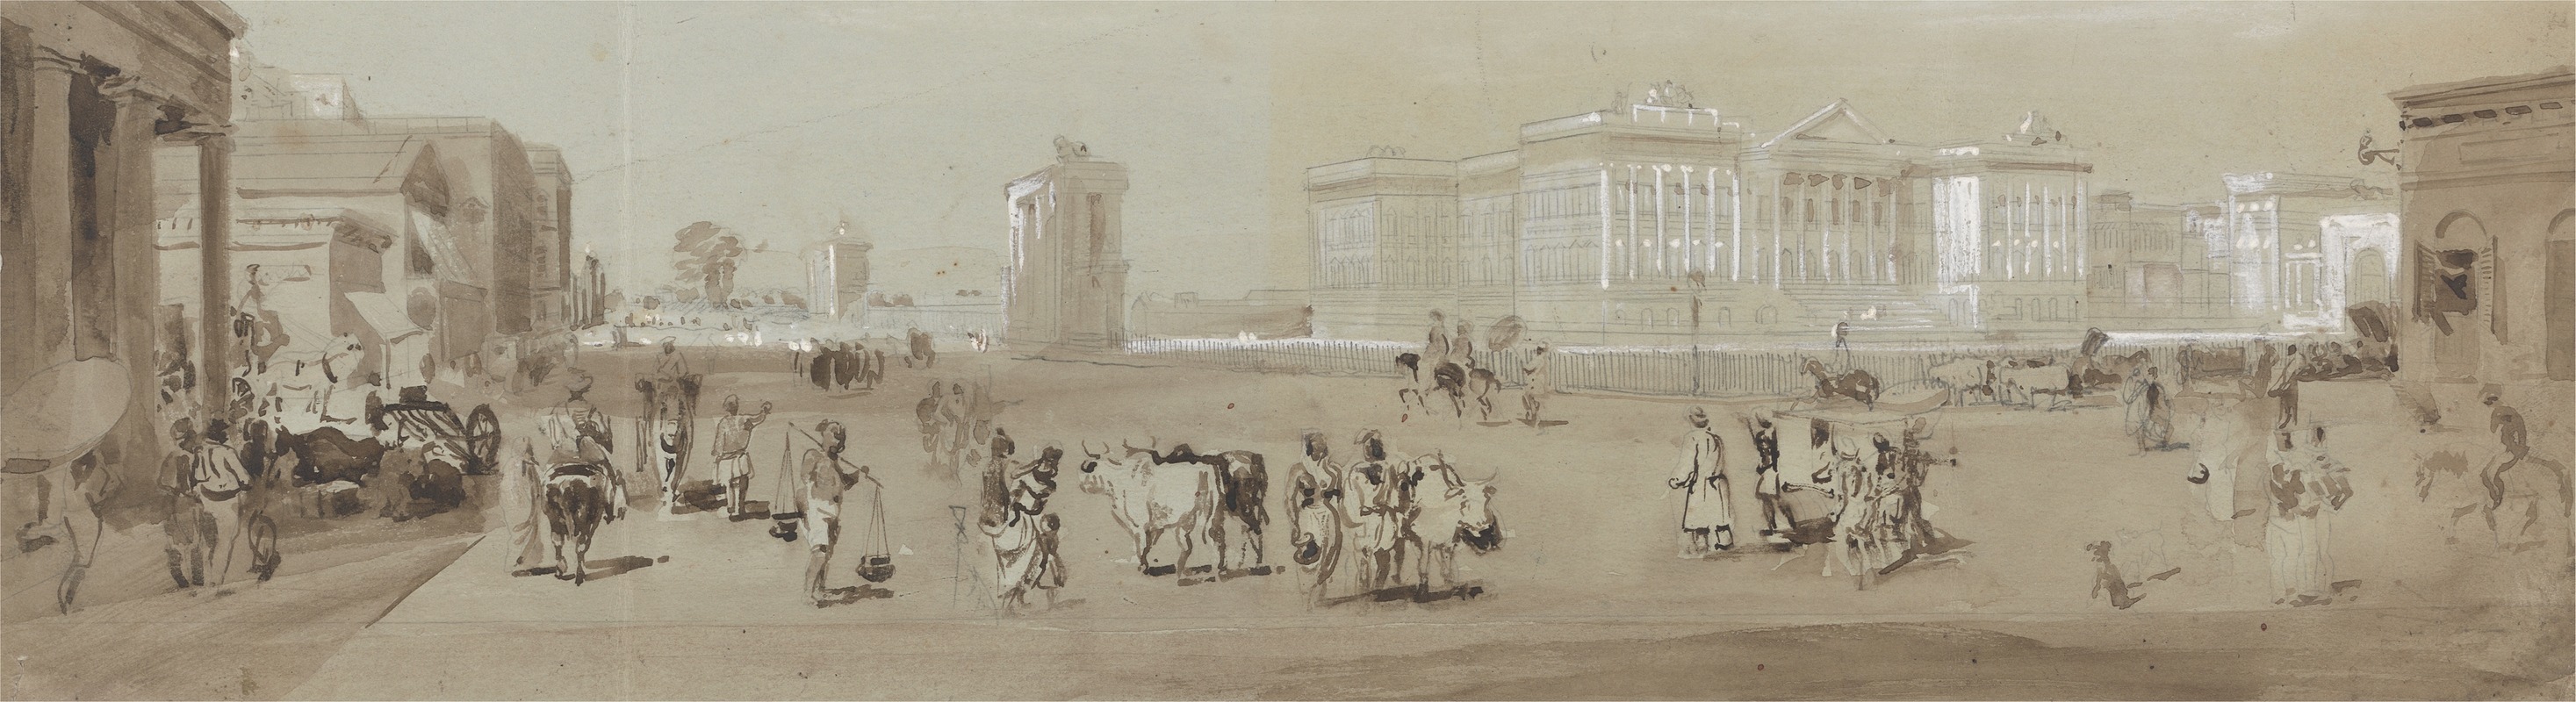 Sir Charles D'Oyly - Government House from St. Andrew’s Library – Calcutta